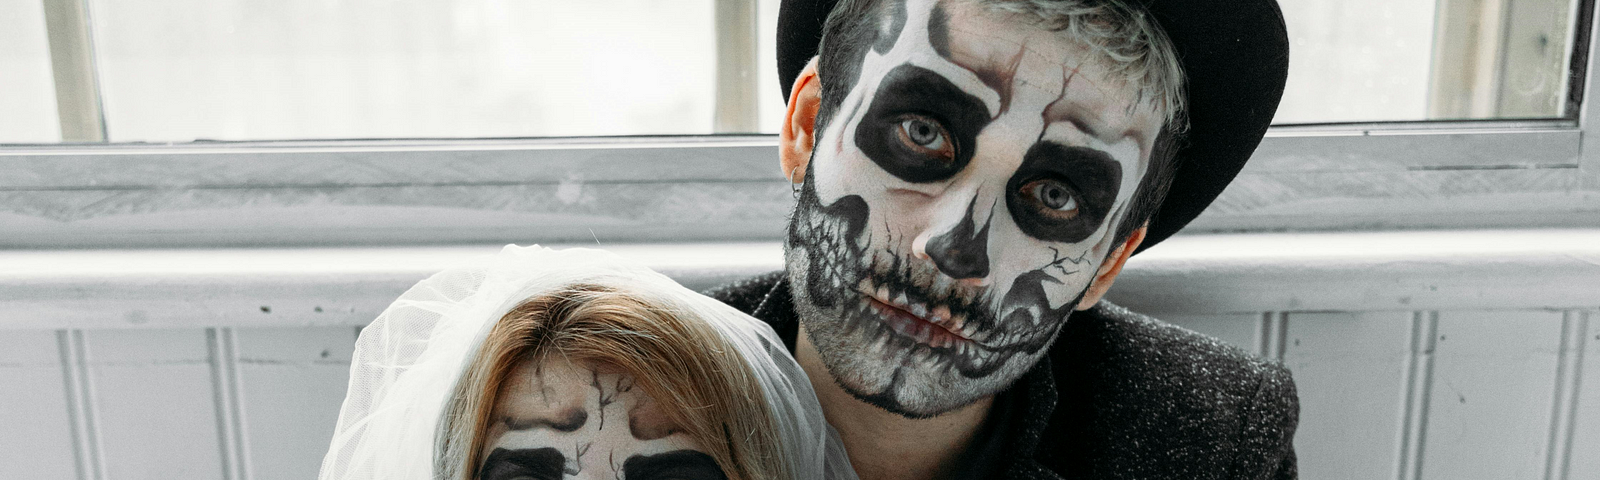 A man and woman both with painted skull faces and looking like a bride and groom. The man is sitting against a wall with a window behind. It is daylight. he is looking into the camera. The woman is sitting between his legs looking away. She doesn’t look very scared but the man does have his hands gently around her neck.